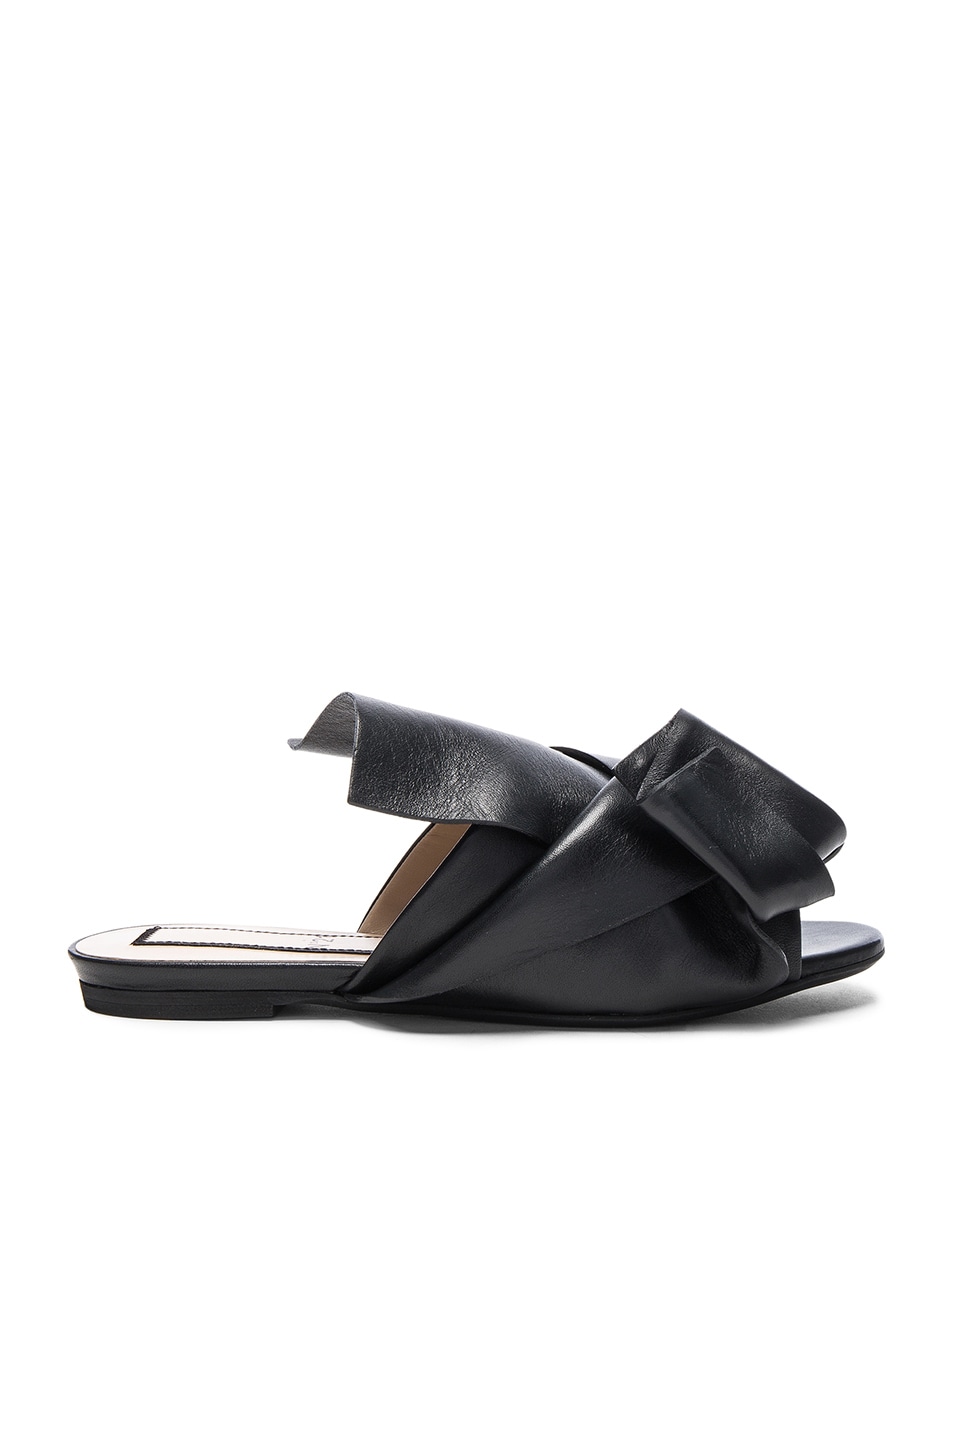 No. 21 Knot Front Leather Sandals in Black Leather | FWRD